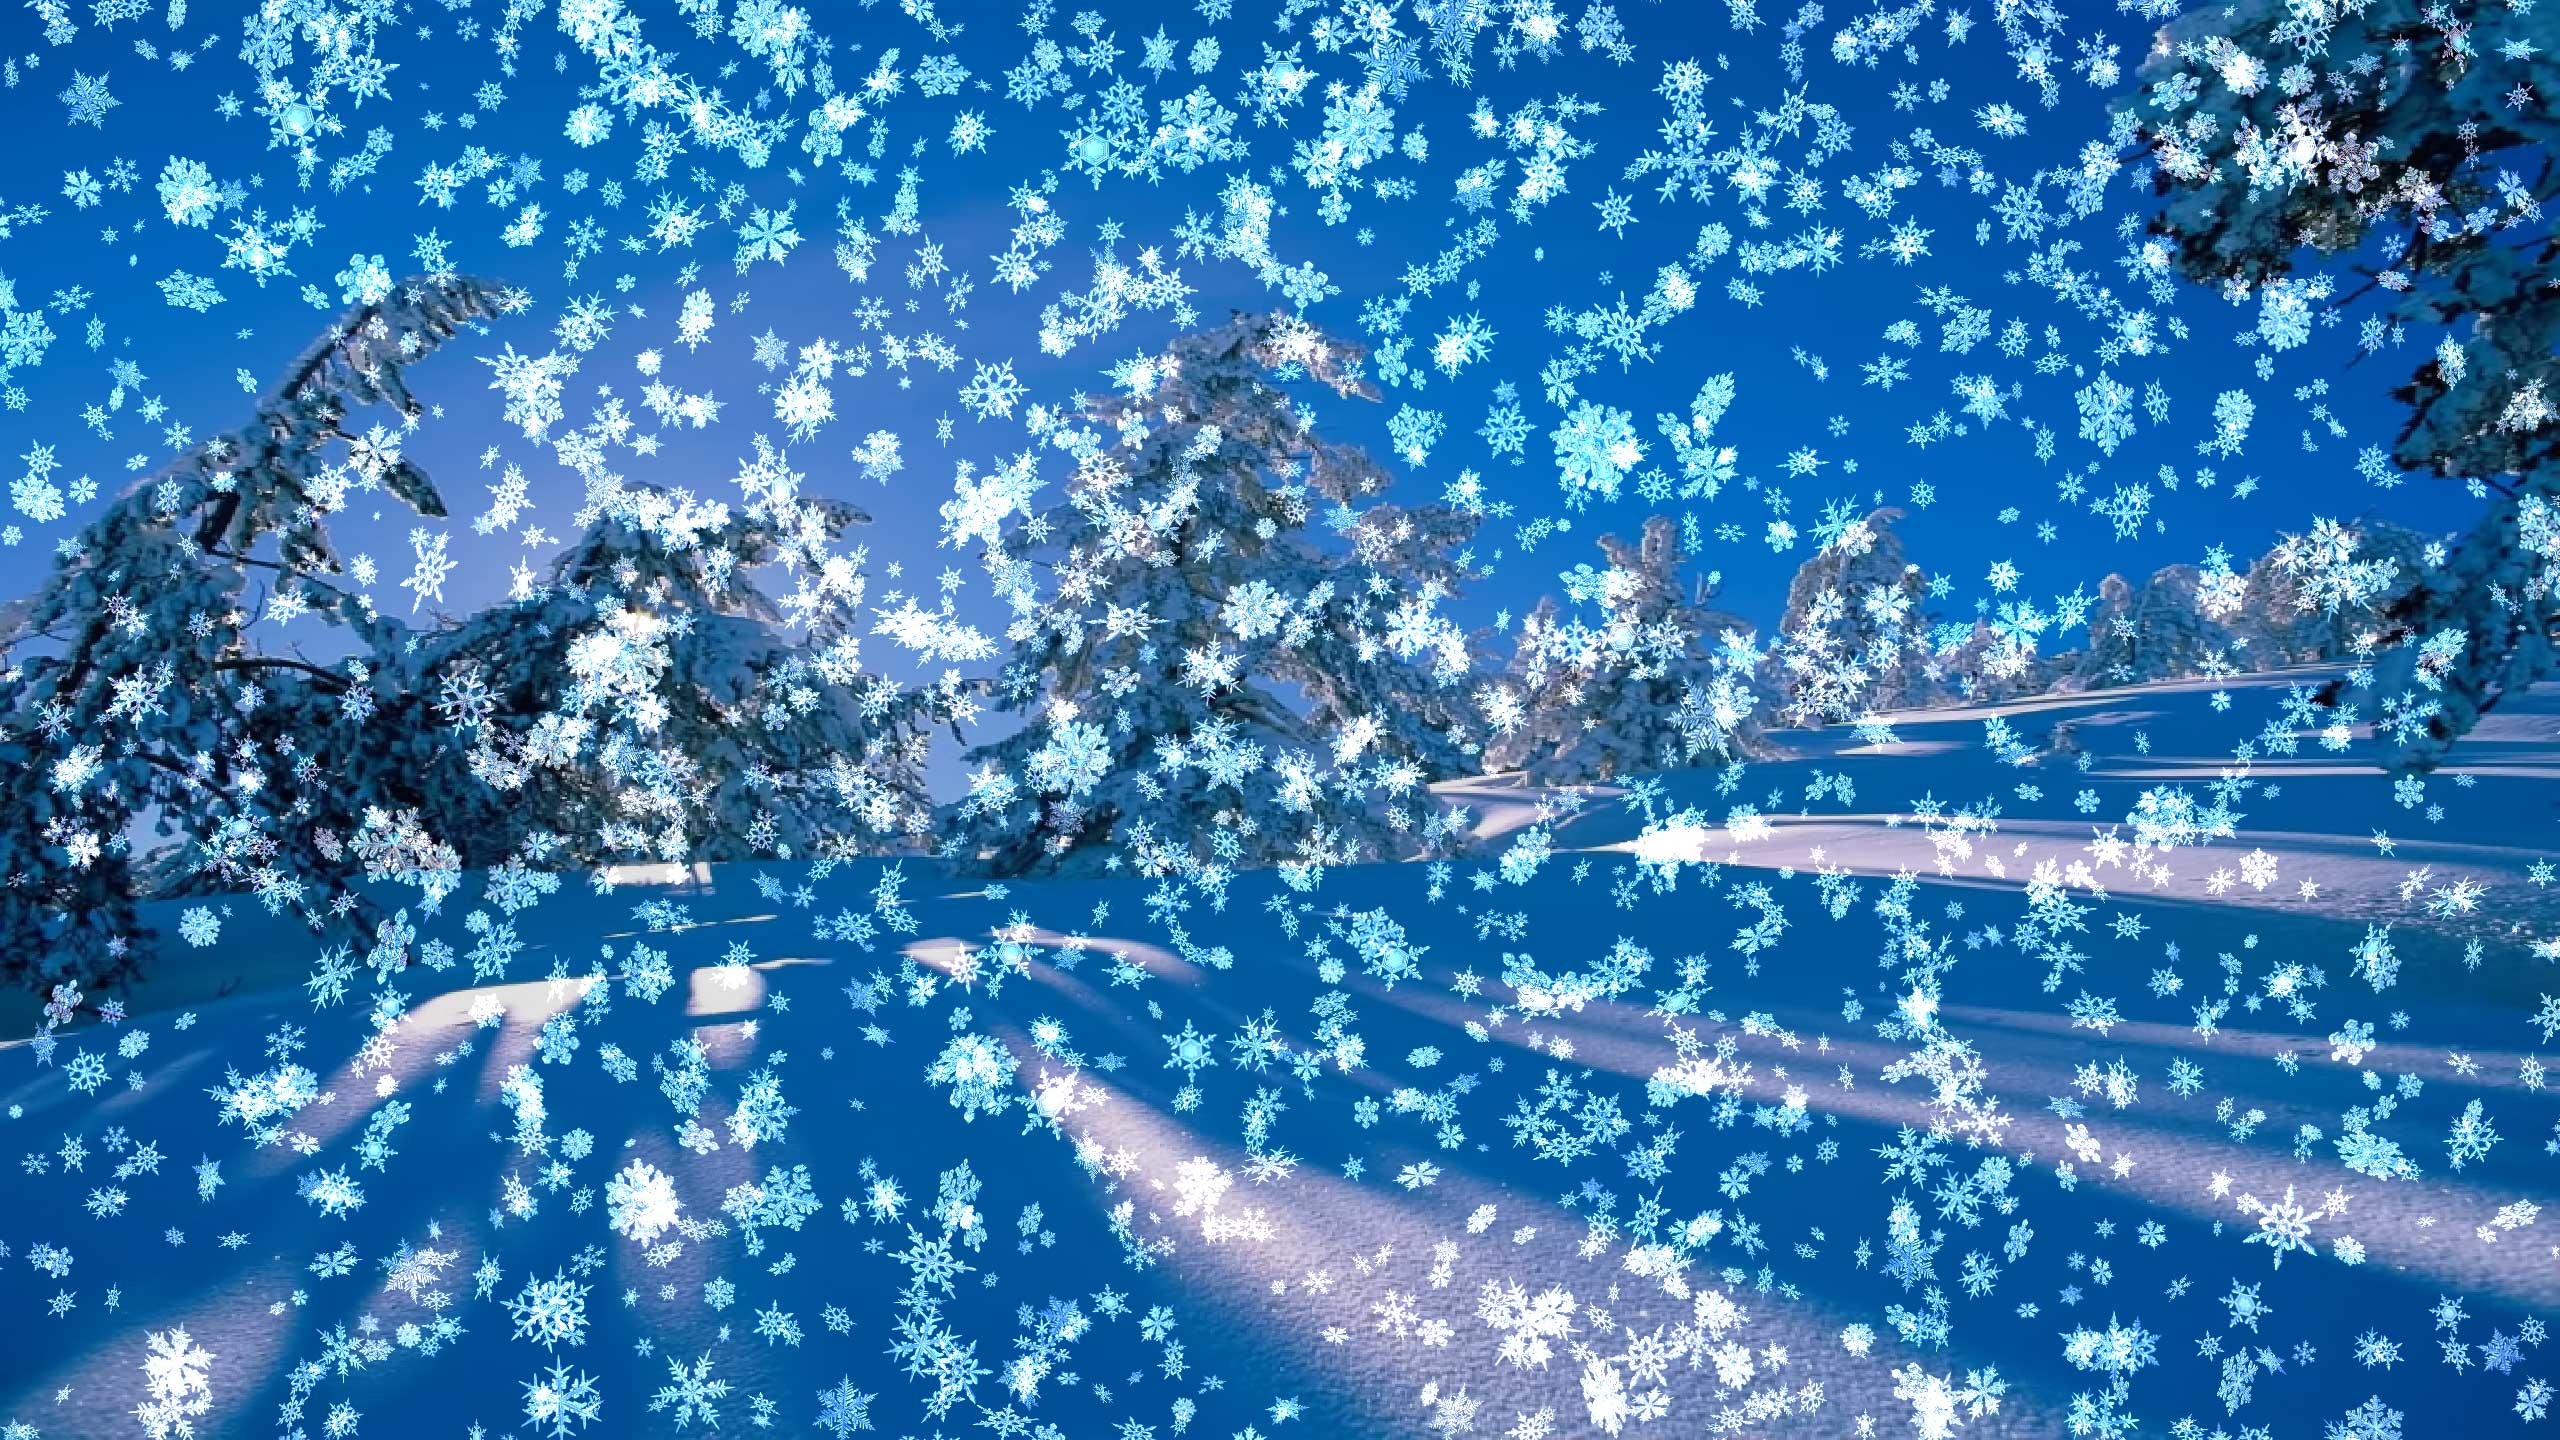 Snowy Desktop is perfect to get you in the mood for the winter holidays. A beautiful snow scene with falling snow on your desktop, blue sky, trees covered